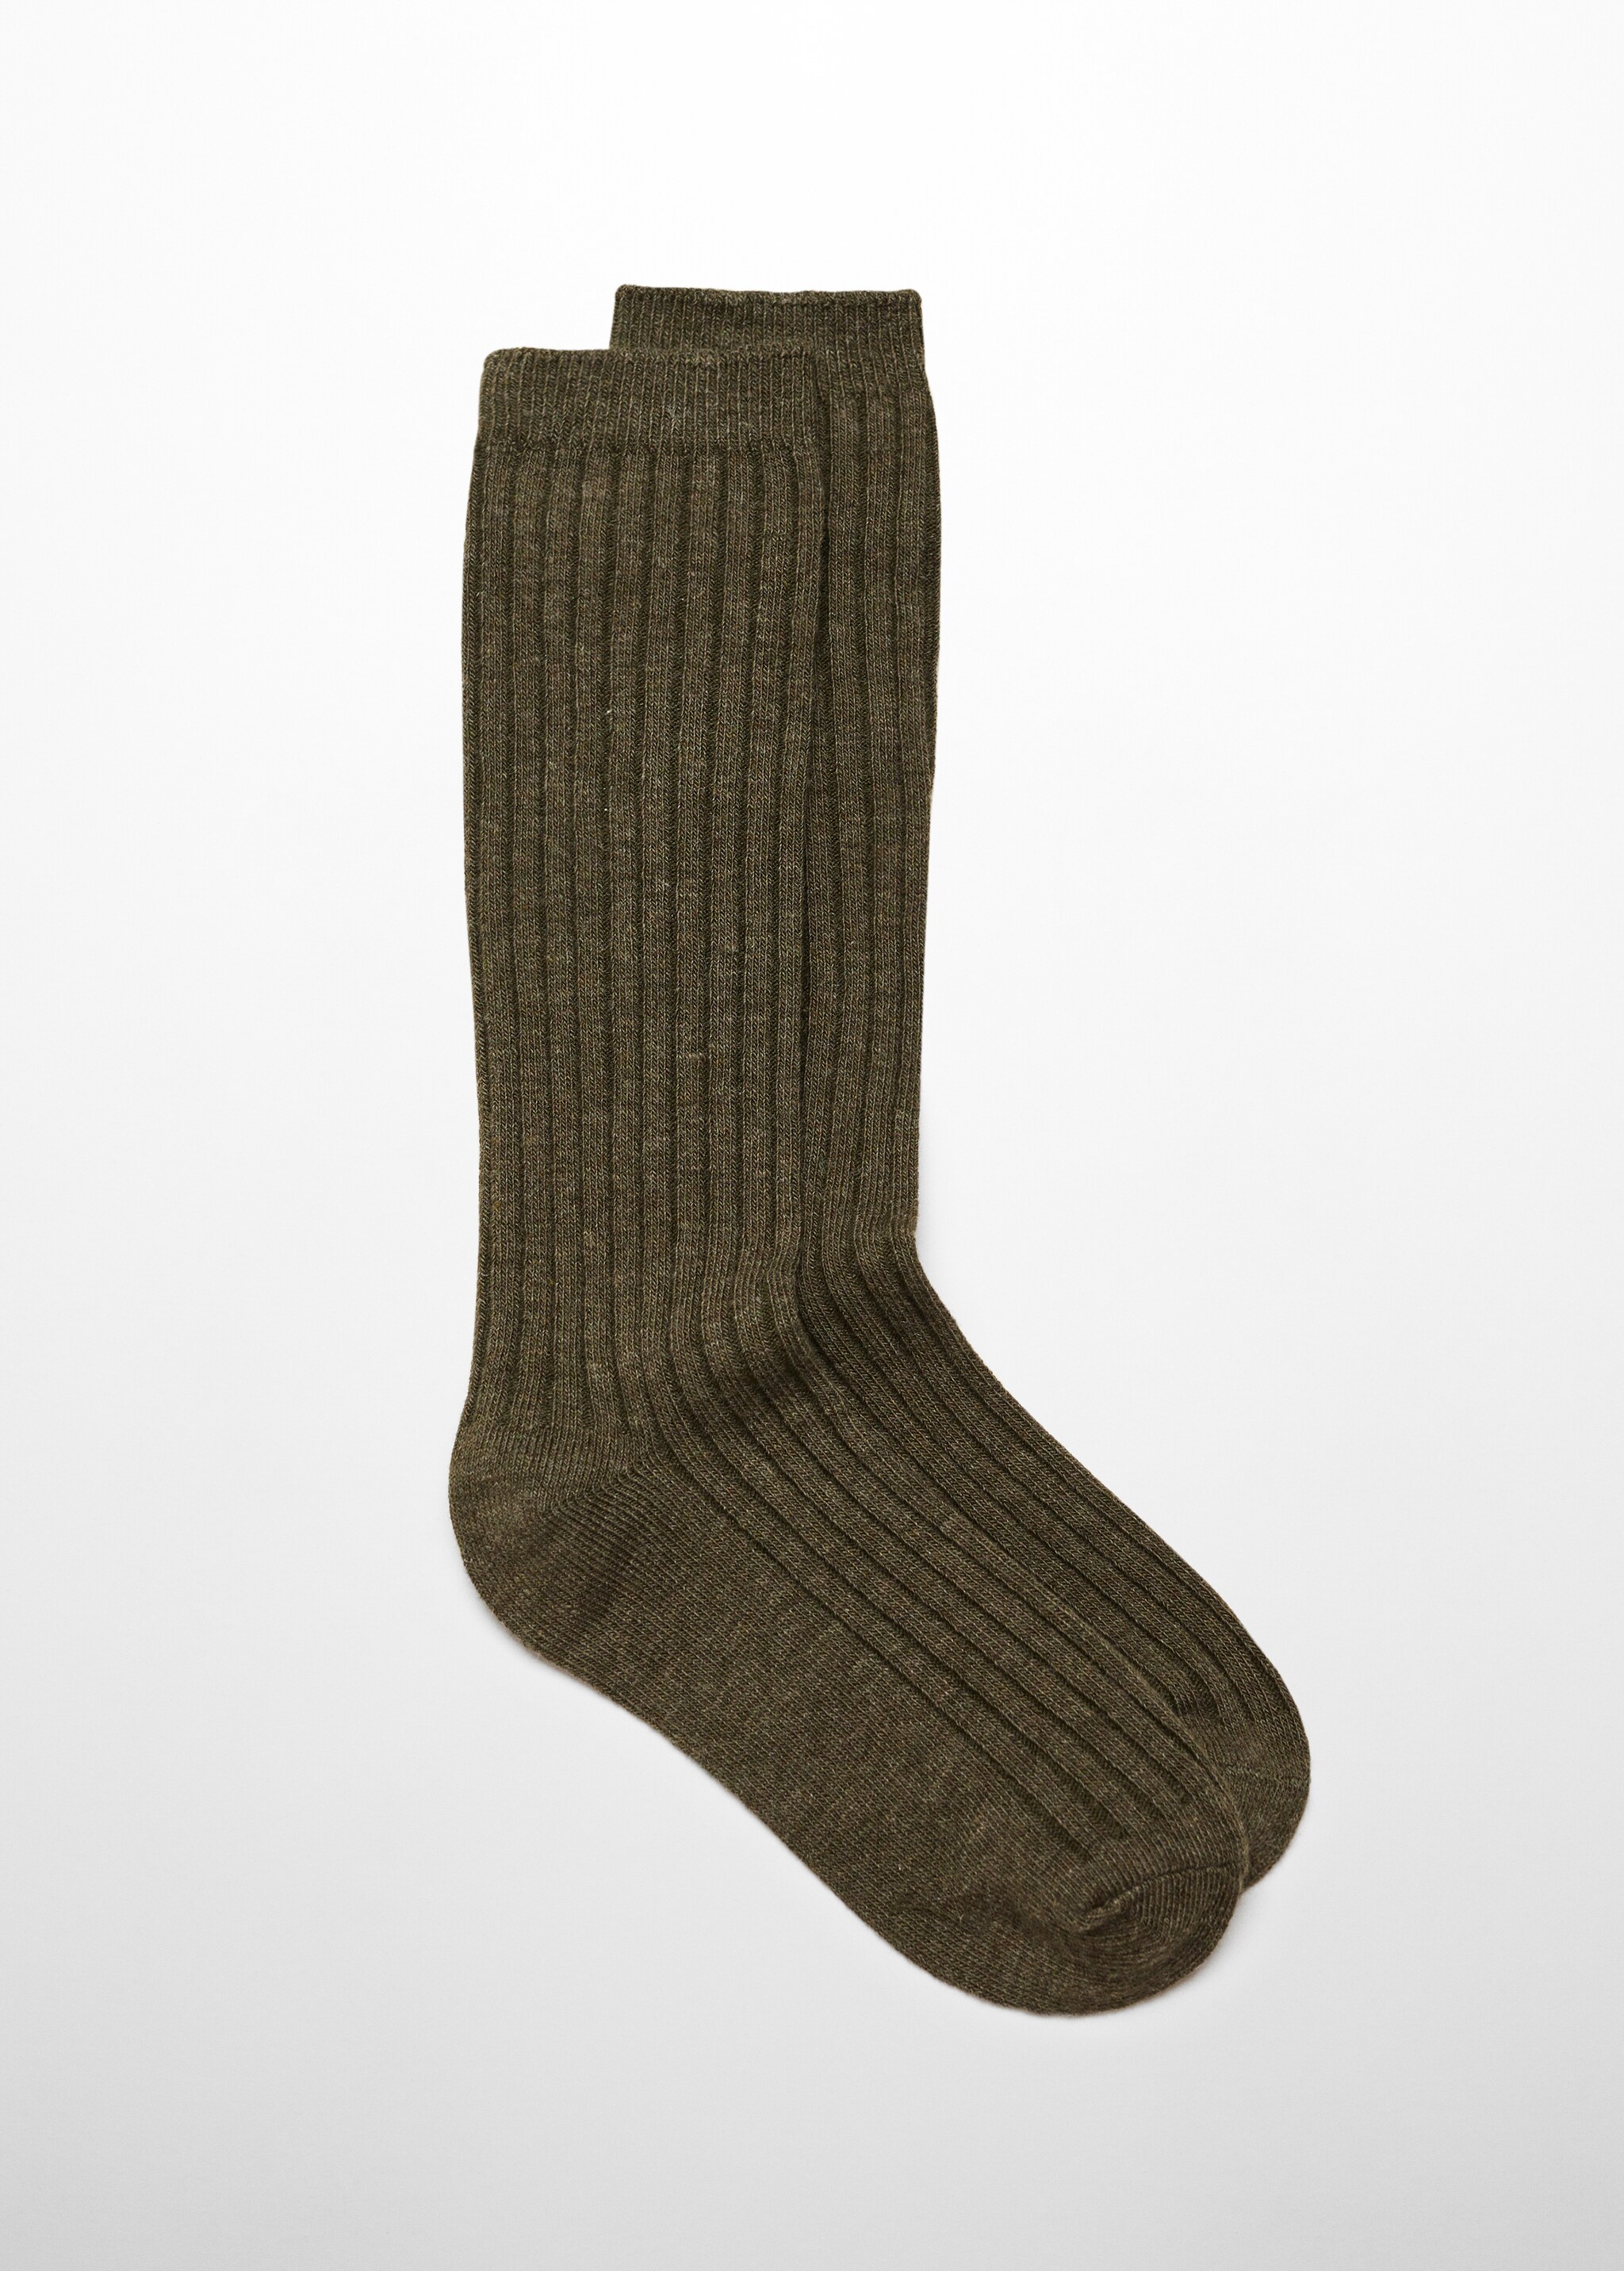 Knit socks - Article without model